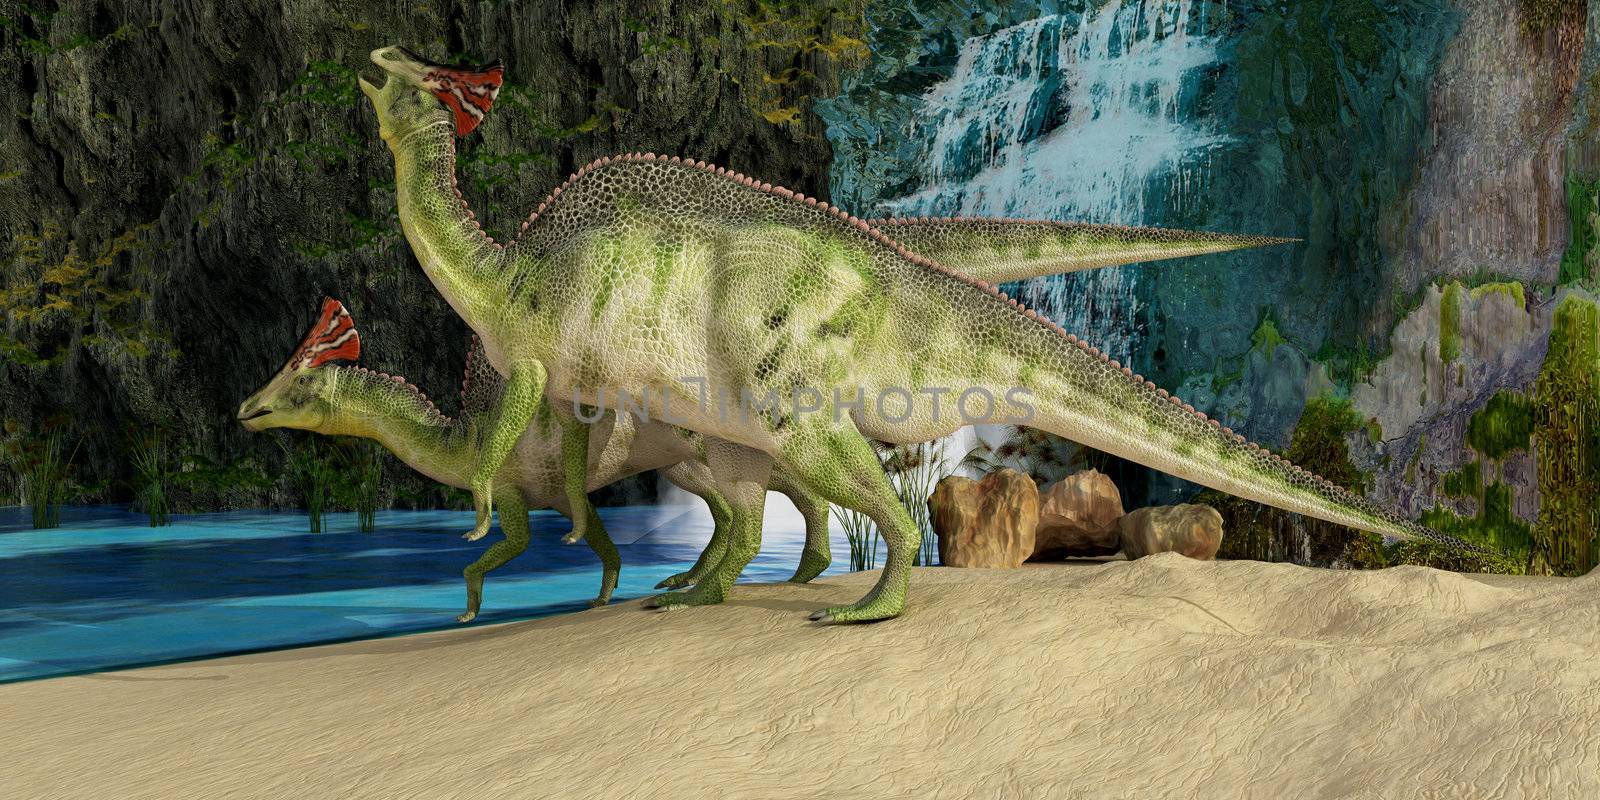 The Olorotitan was a duckbilled dinosaur from the Late Cretaceous and was found in Russia.